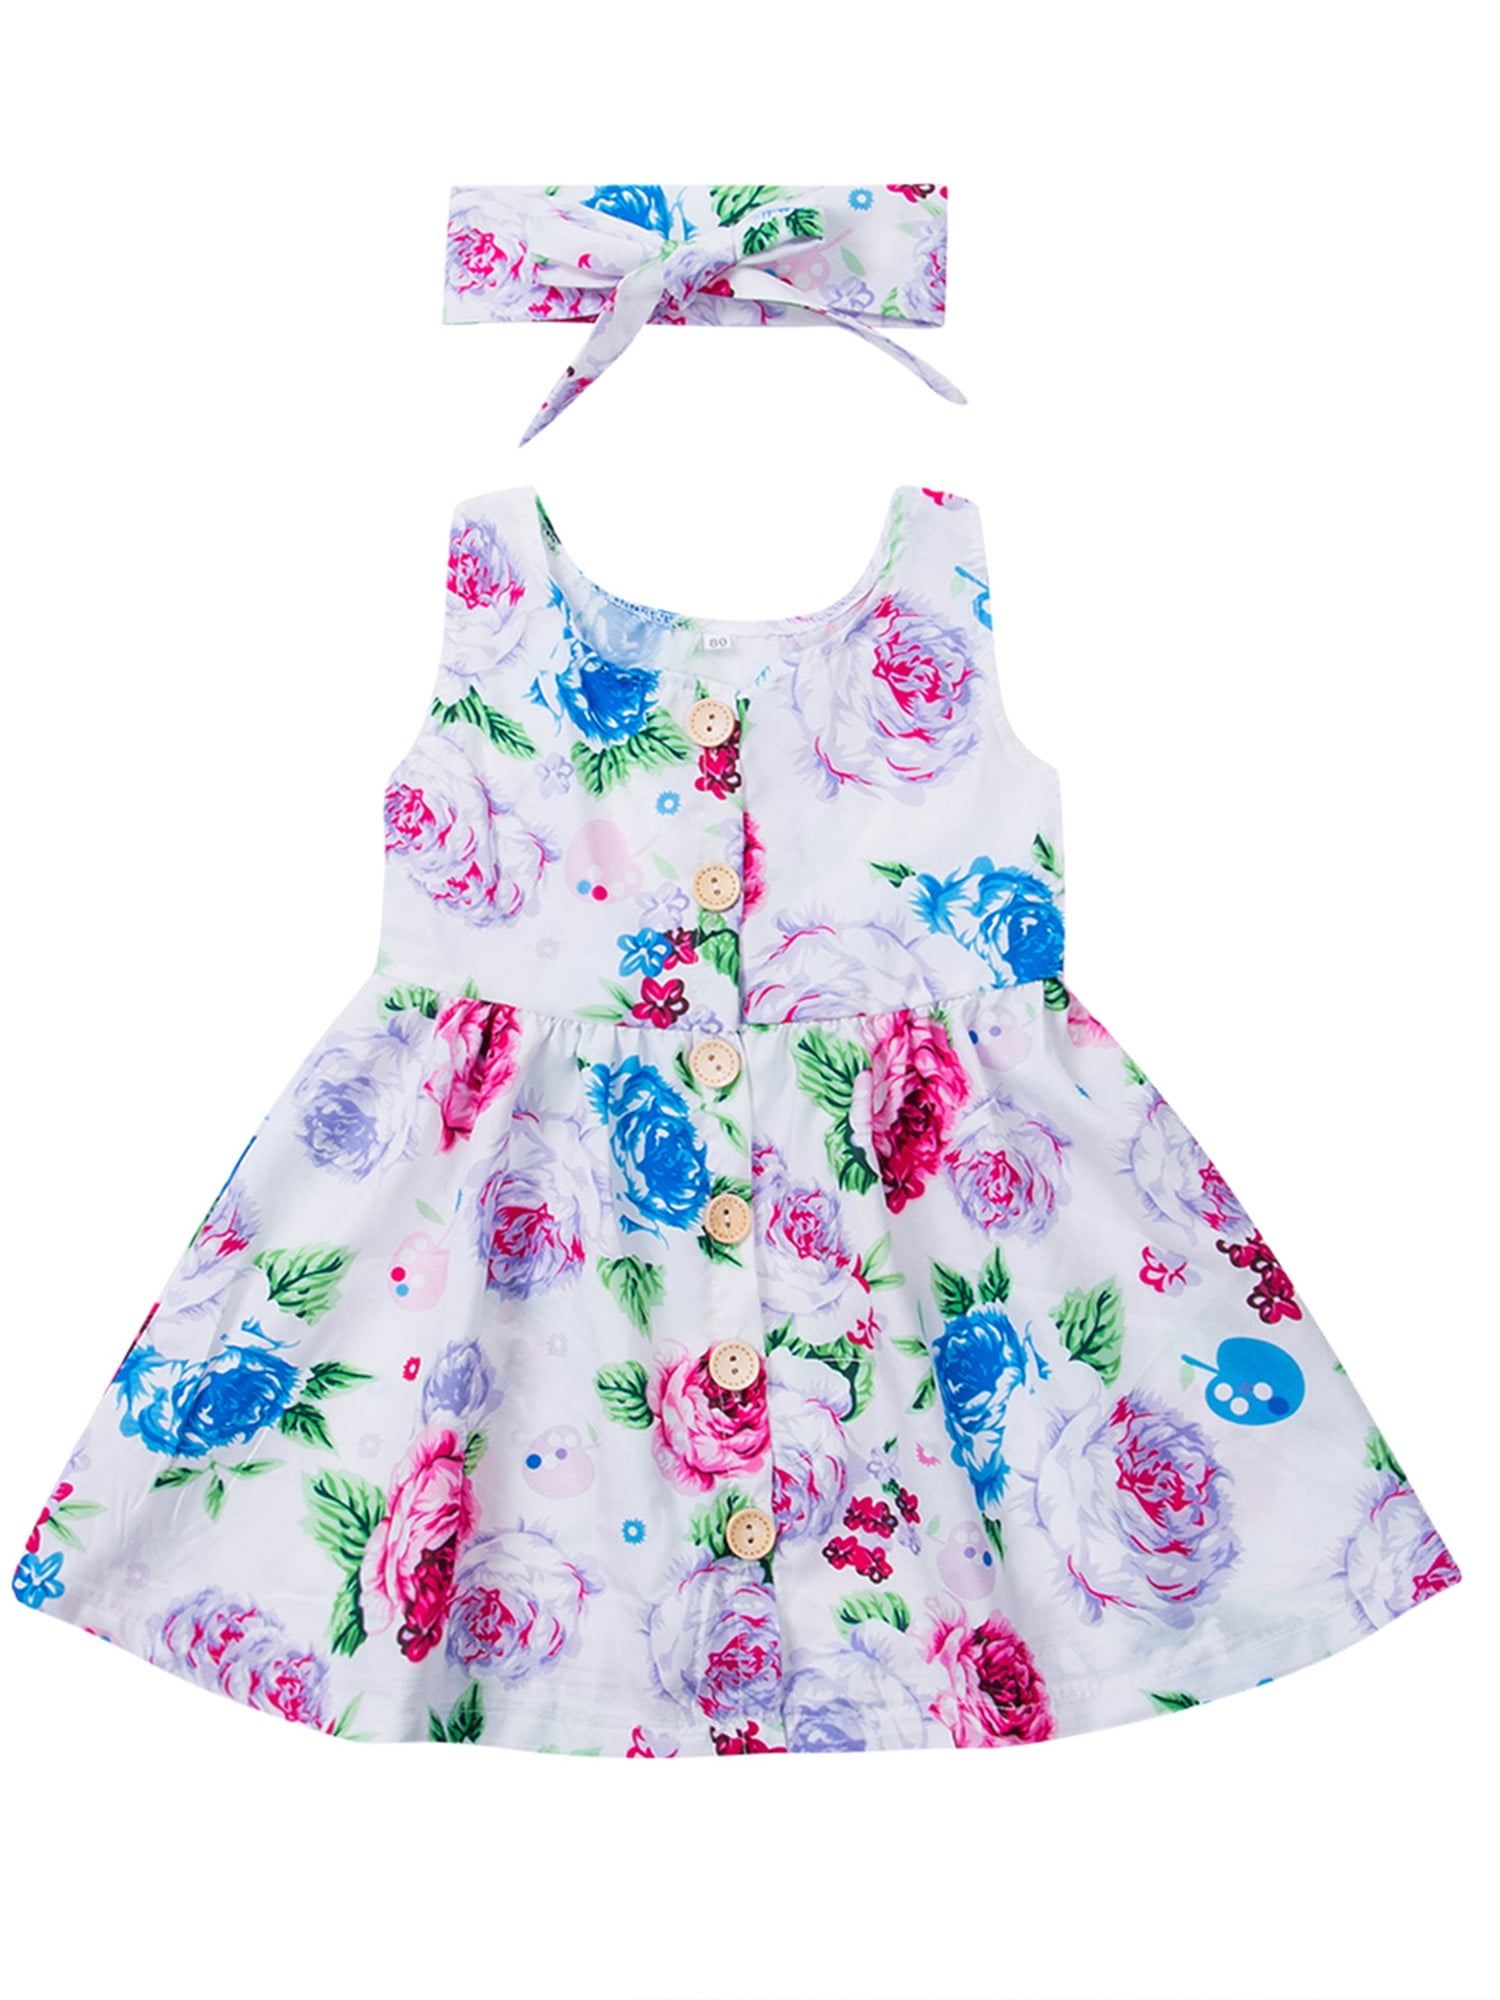 YOUNGER TREE Toddler Baby Girls Summer Floral Dress Sleeveless Princess Party Pageant Dresses Sundress 